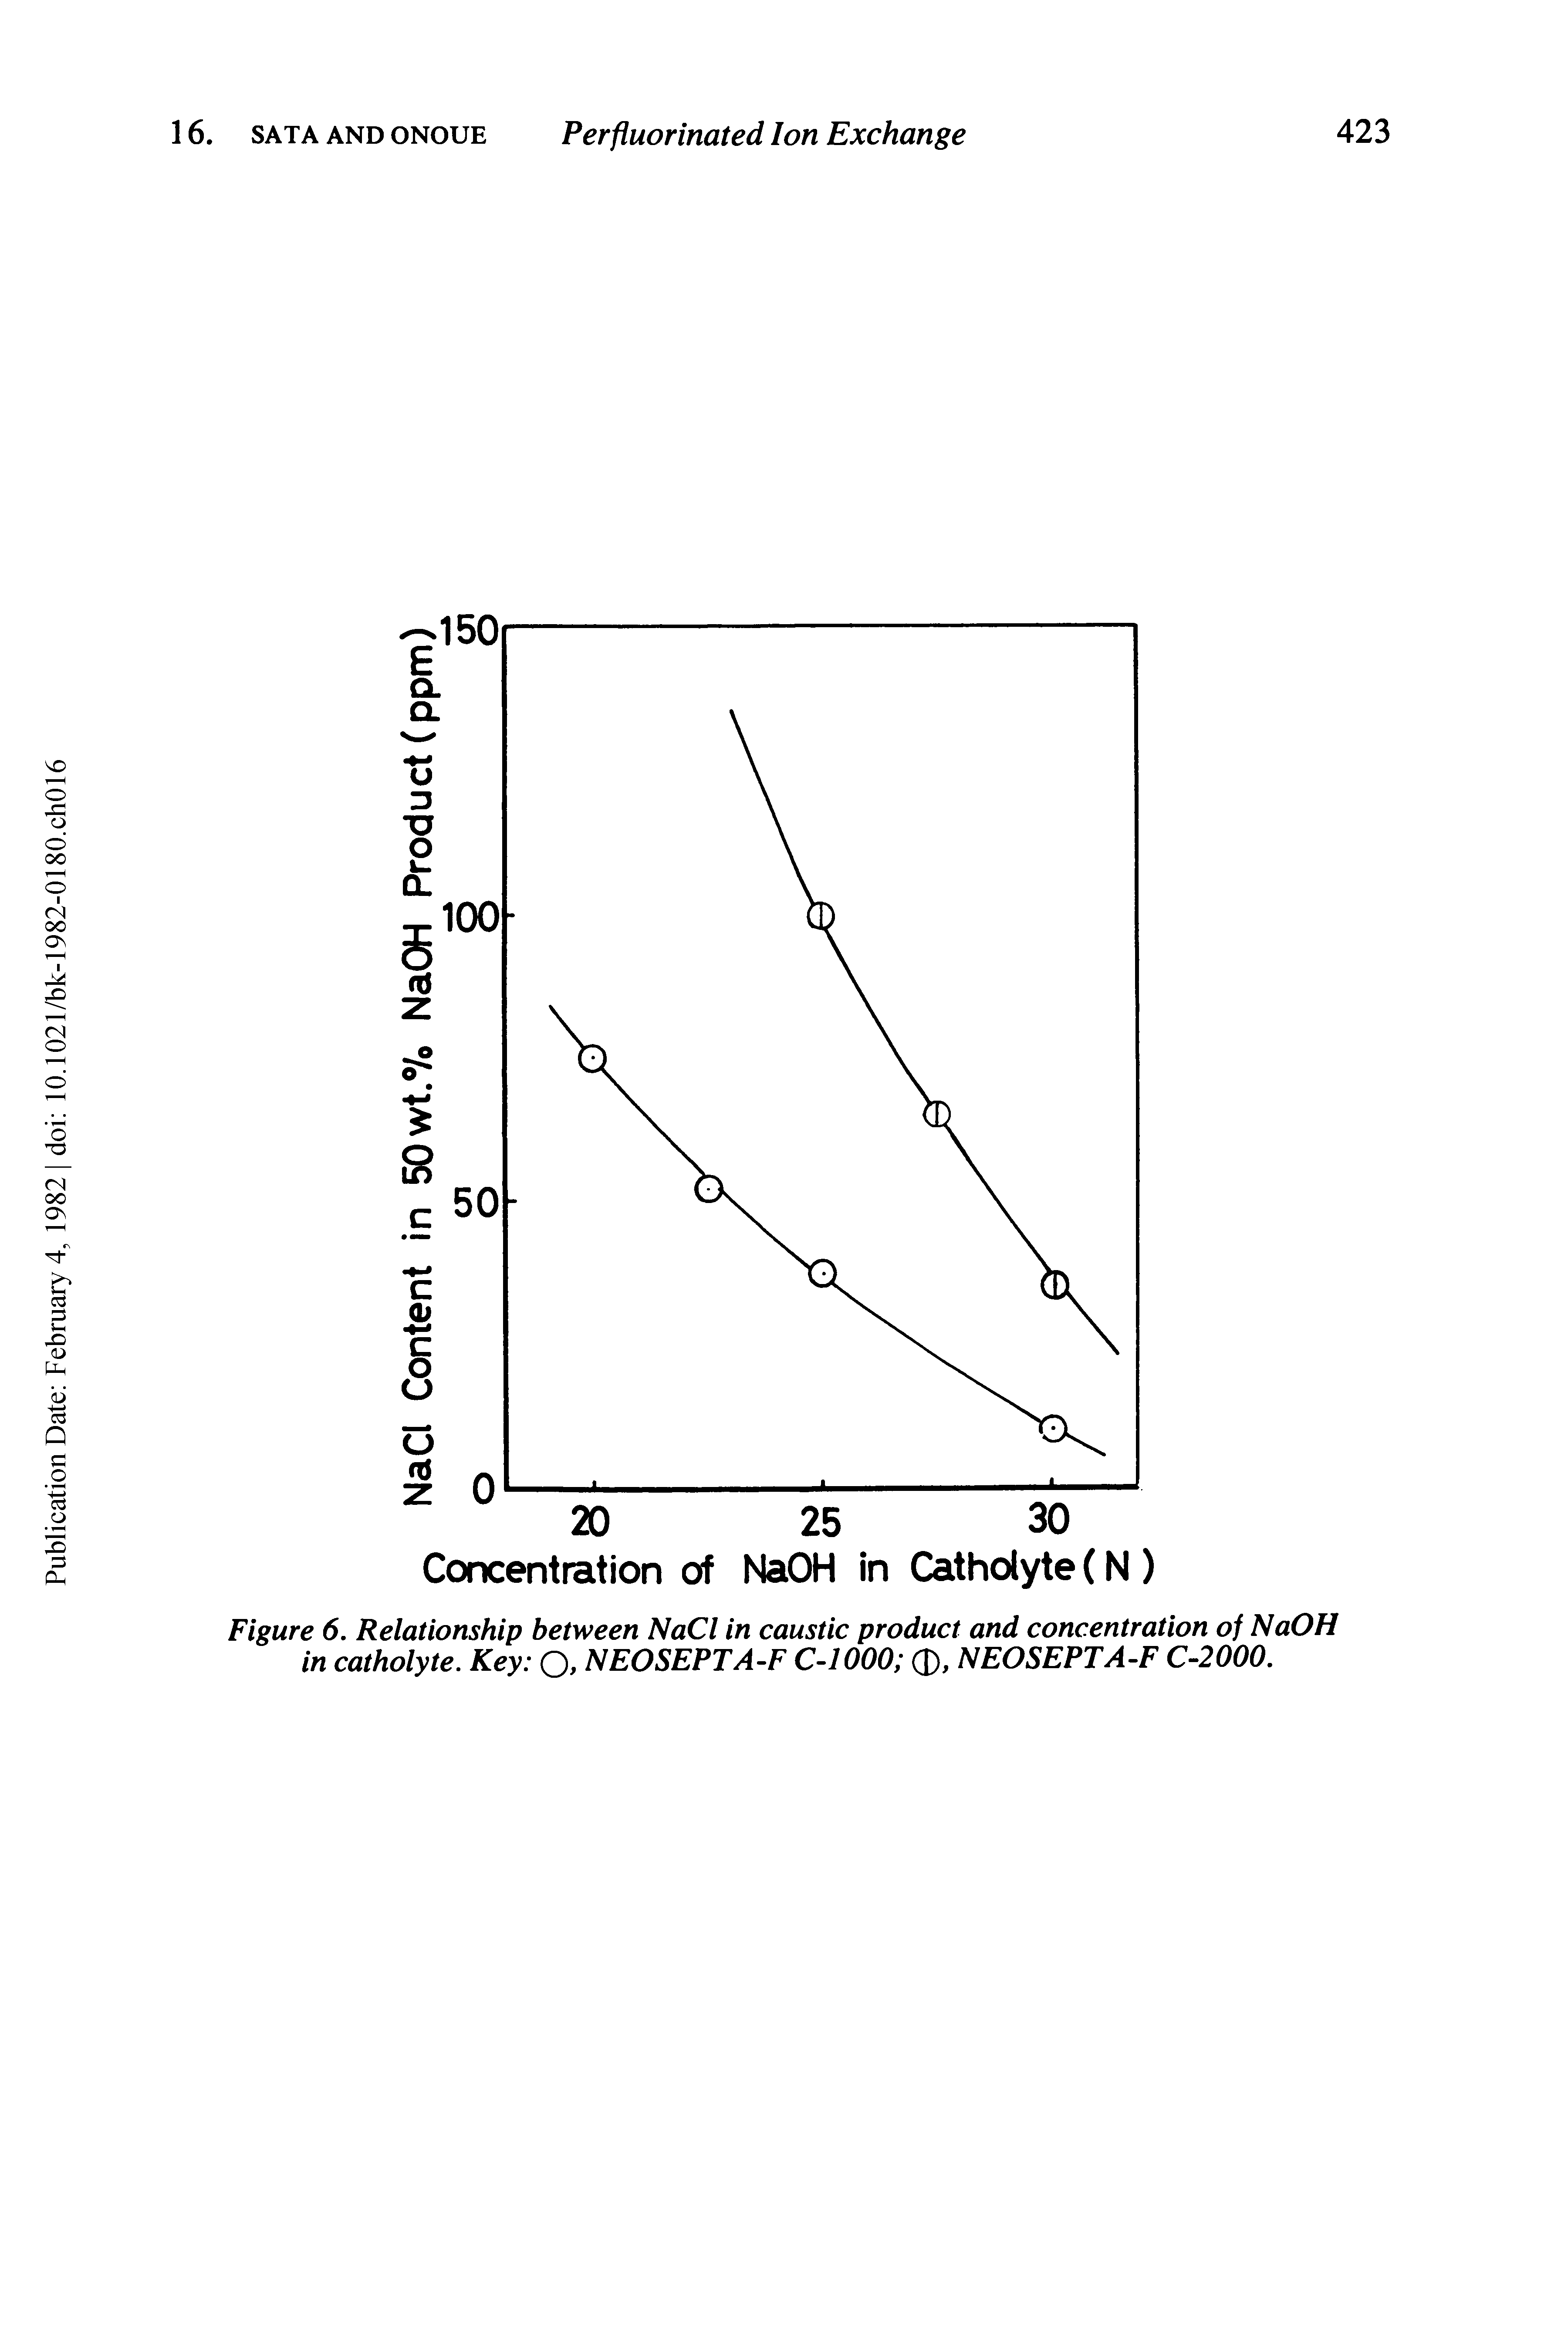 Figure 6. Relationship between NaCl in caustic product and concentration of NaOH in catholyte. Key Q, NEOSEPTA-F C-1000 fl), NEOSEPTA-F C-2000.